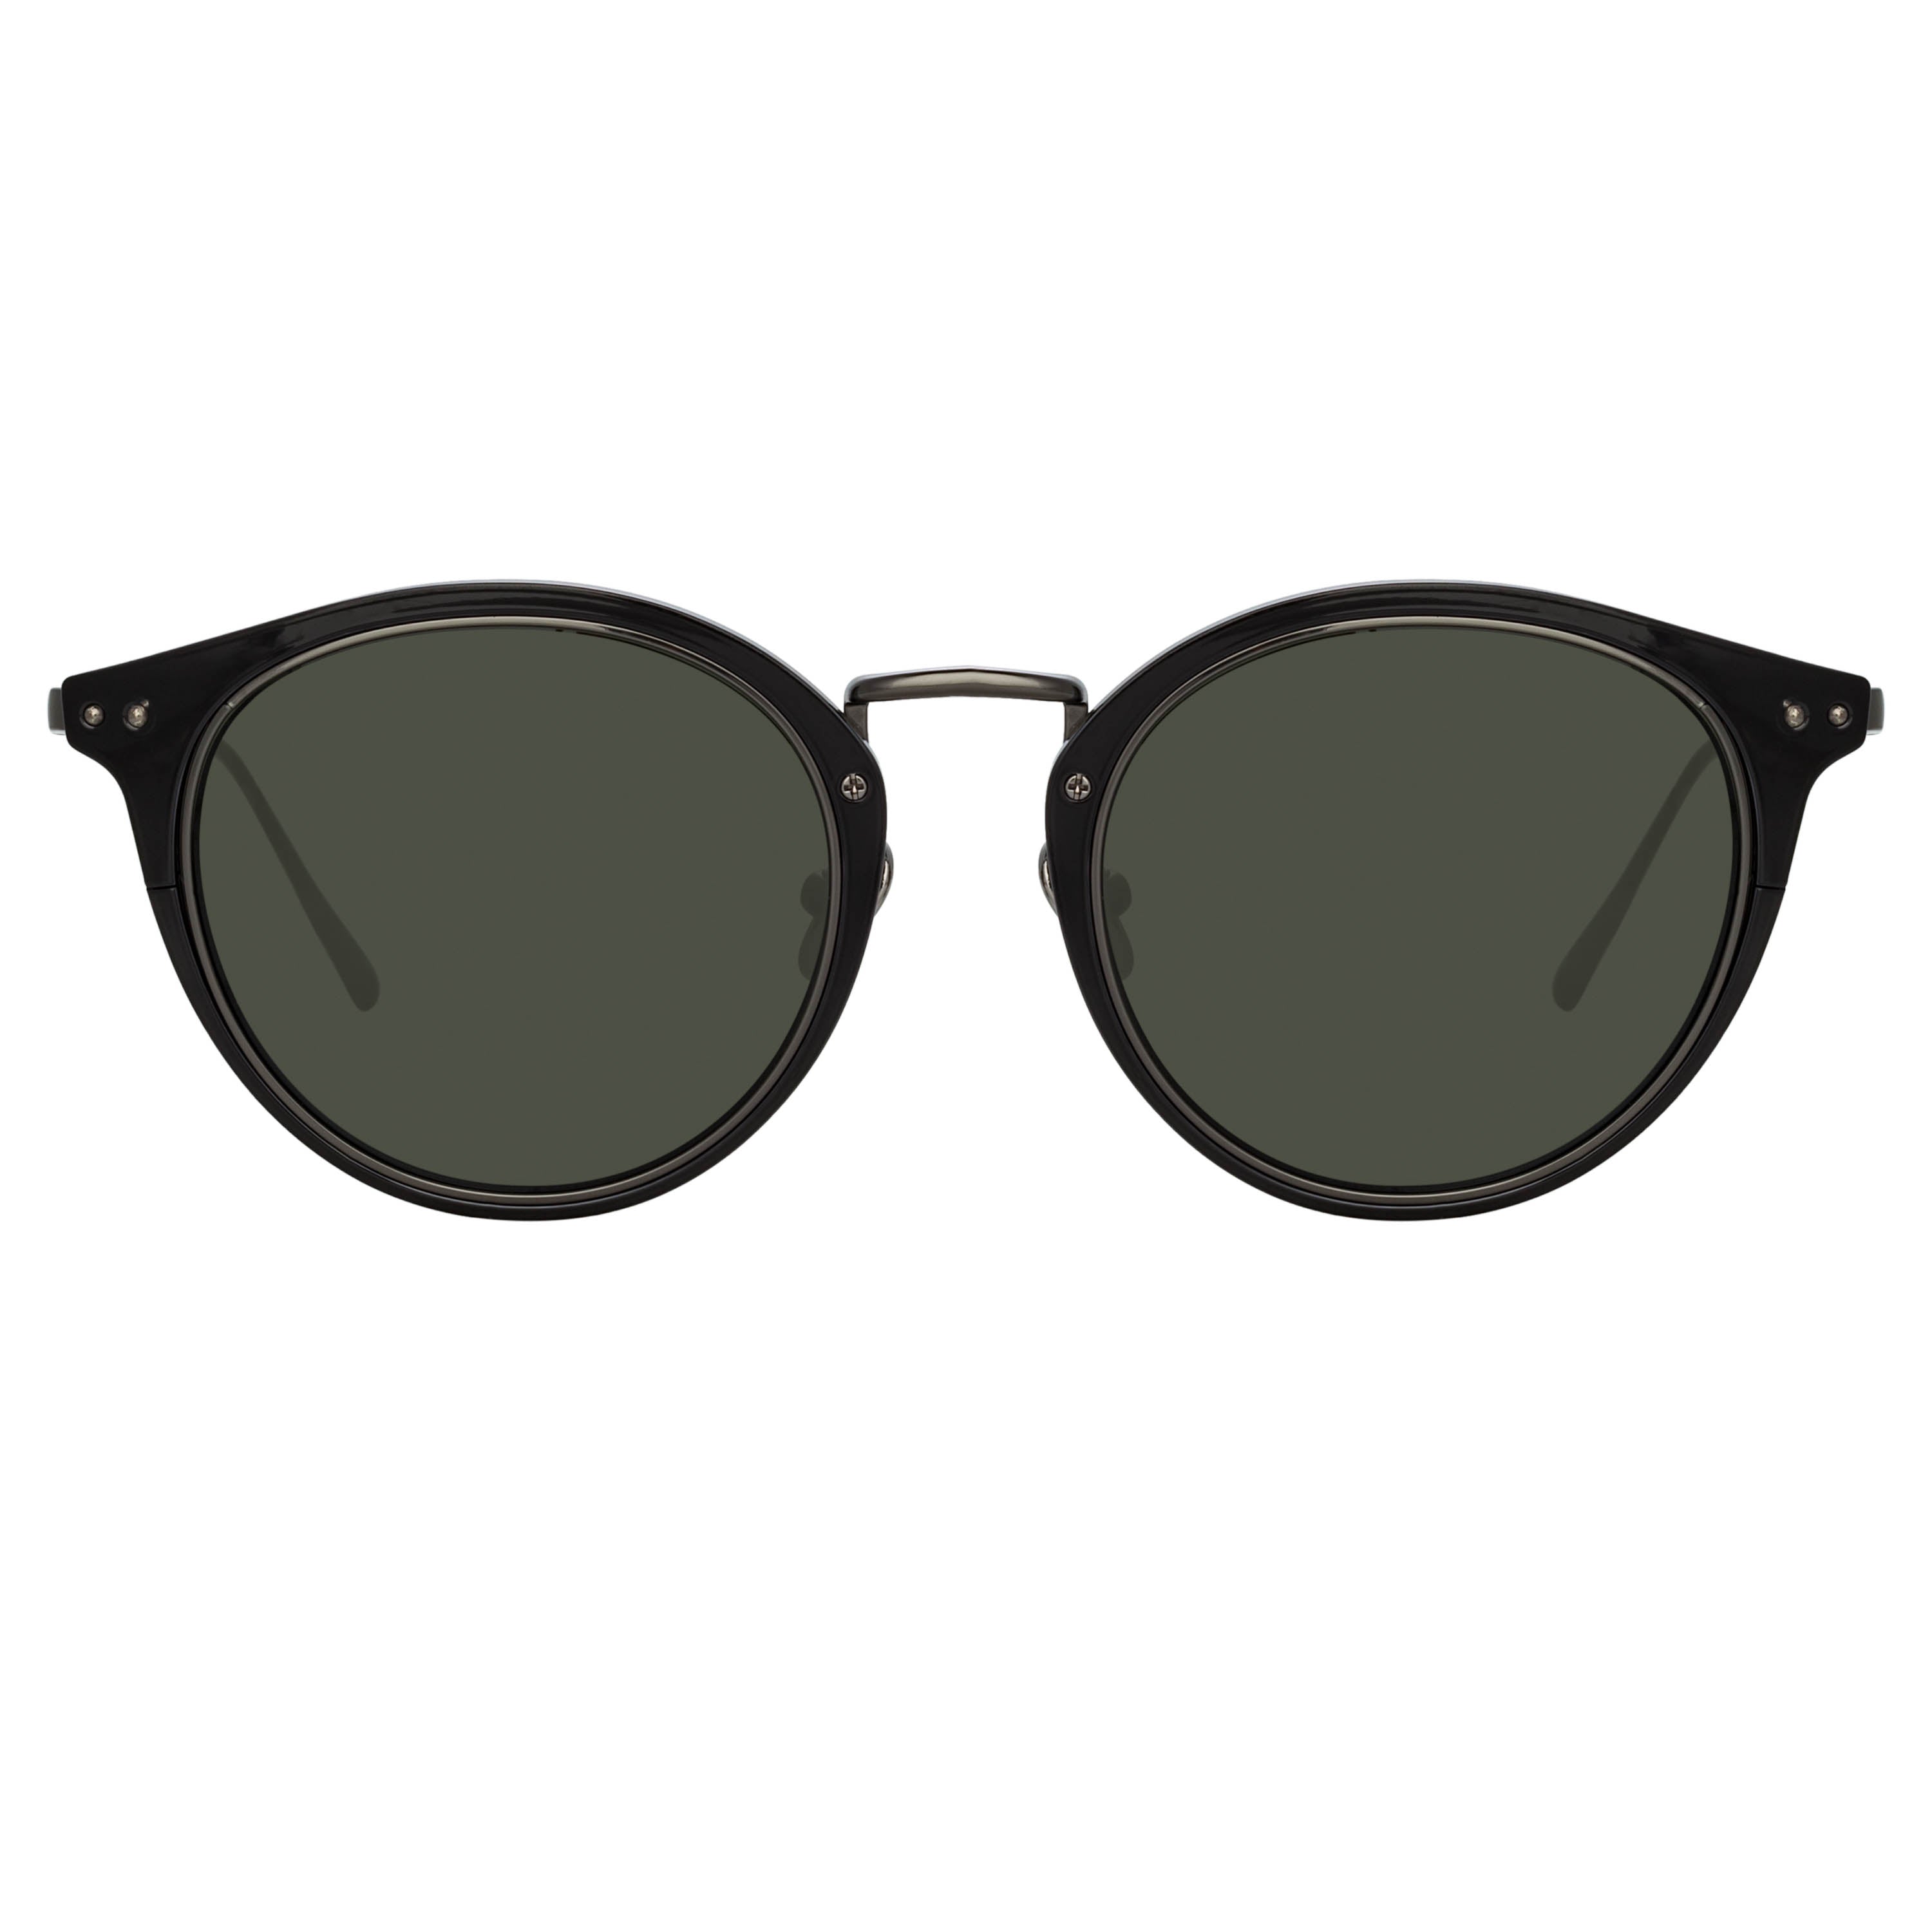 Cooper Oval Sunglasses in Nickel and Grey